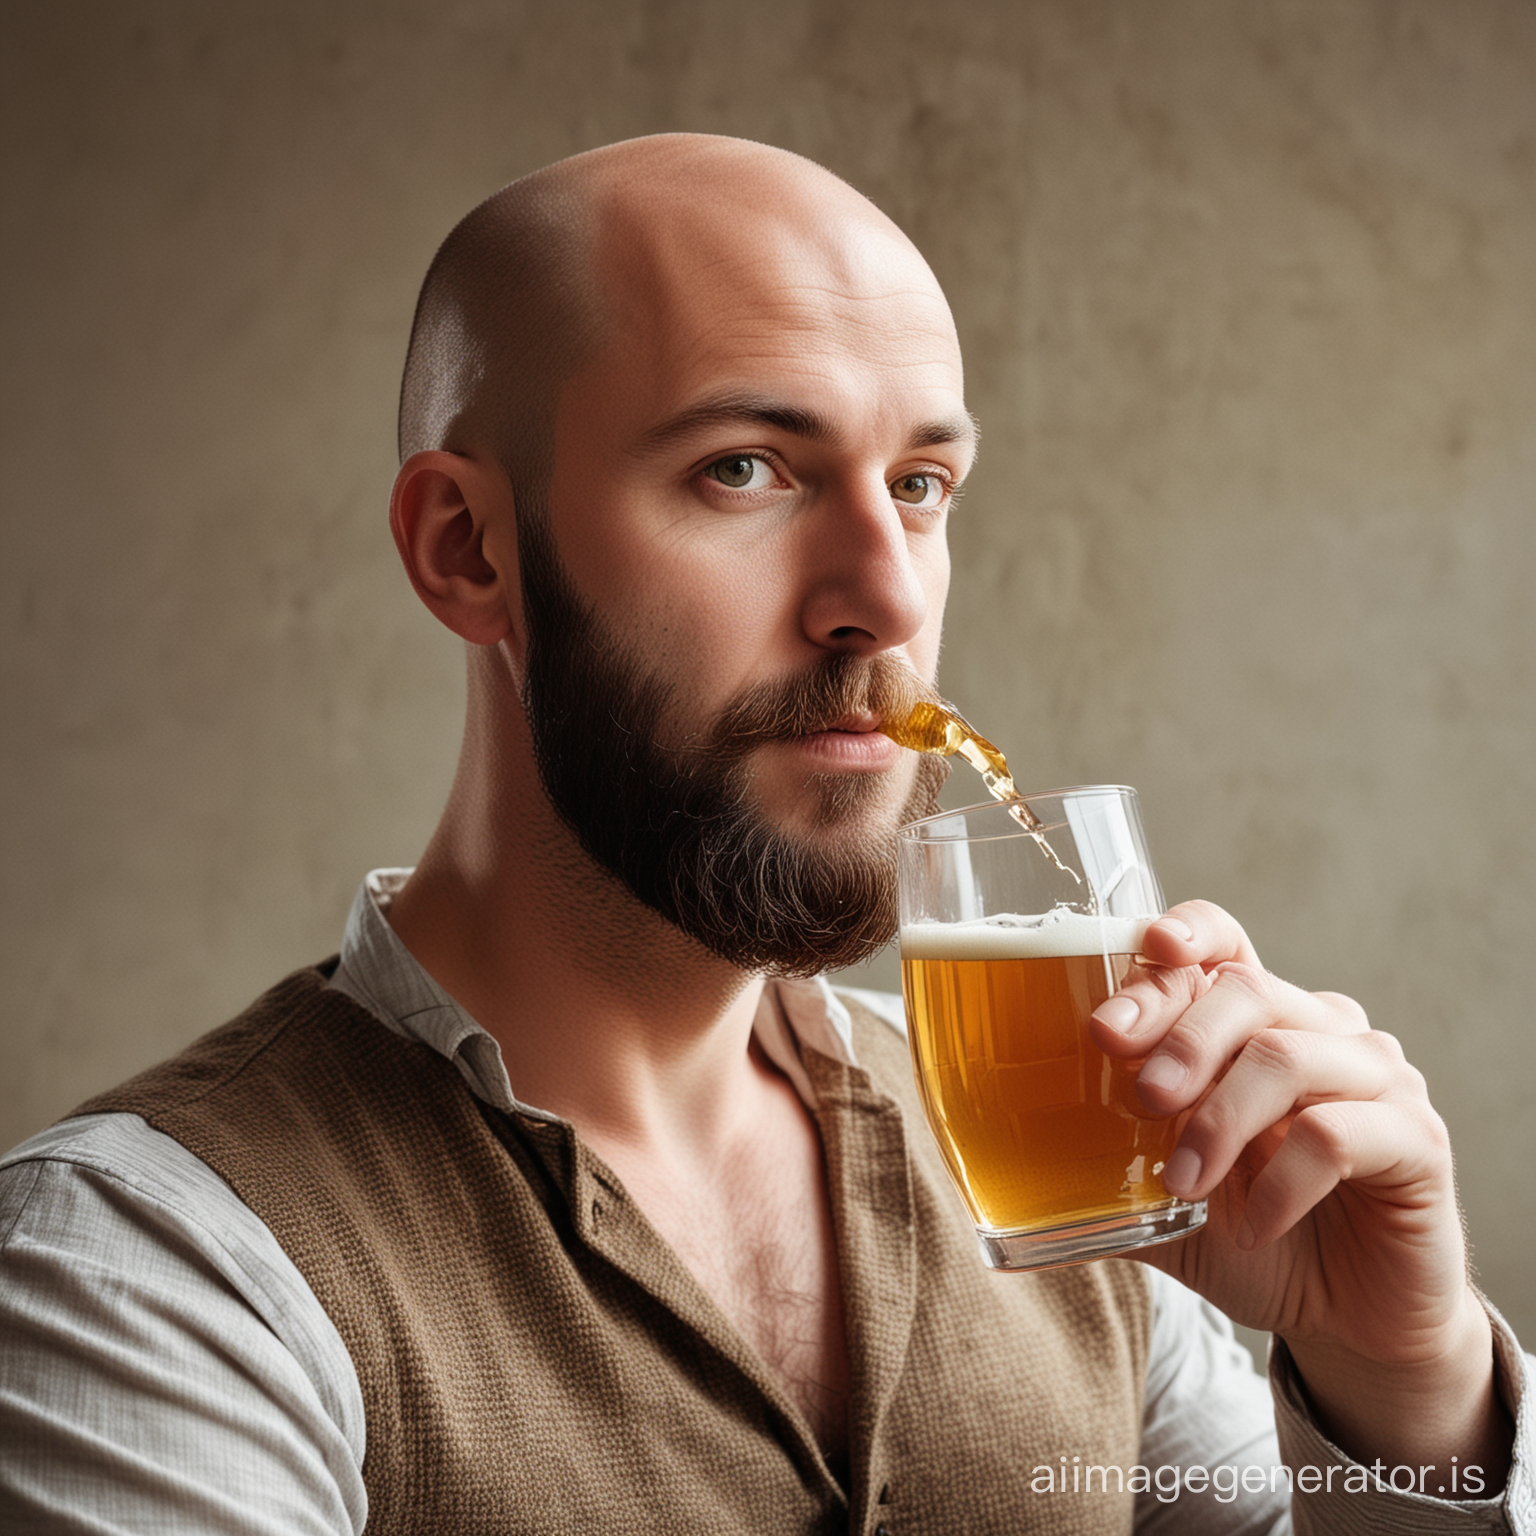 Bald man with short beard drinking a glass of cider